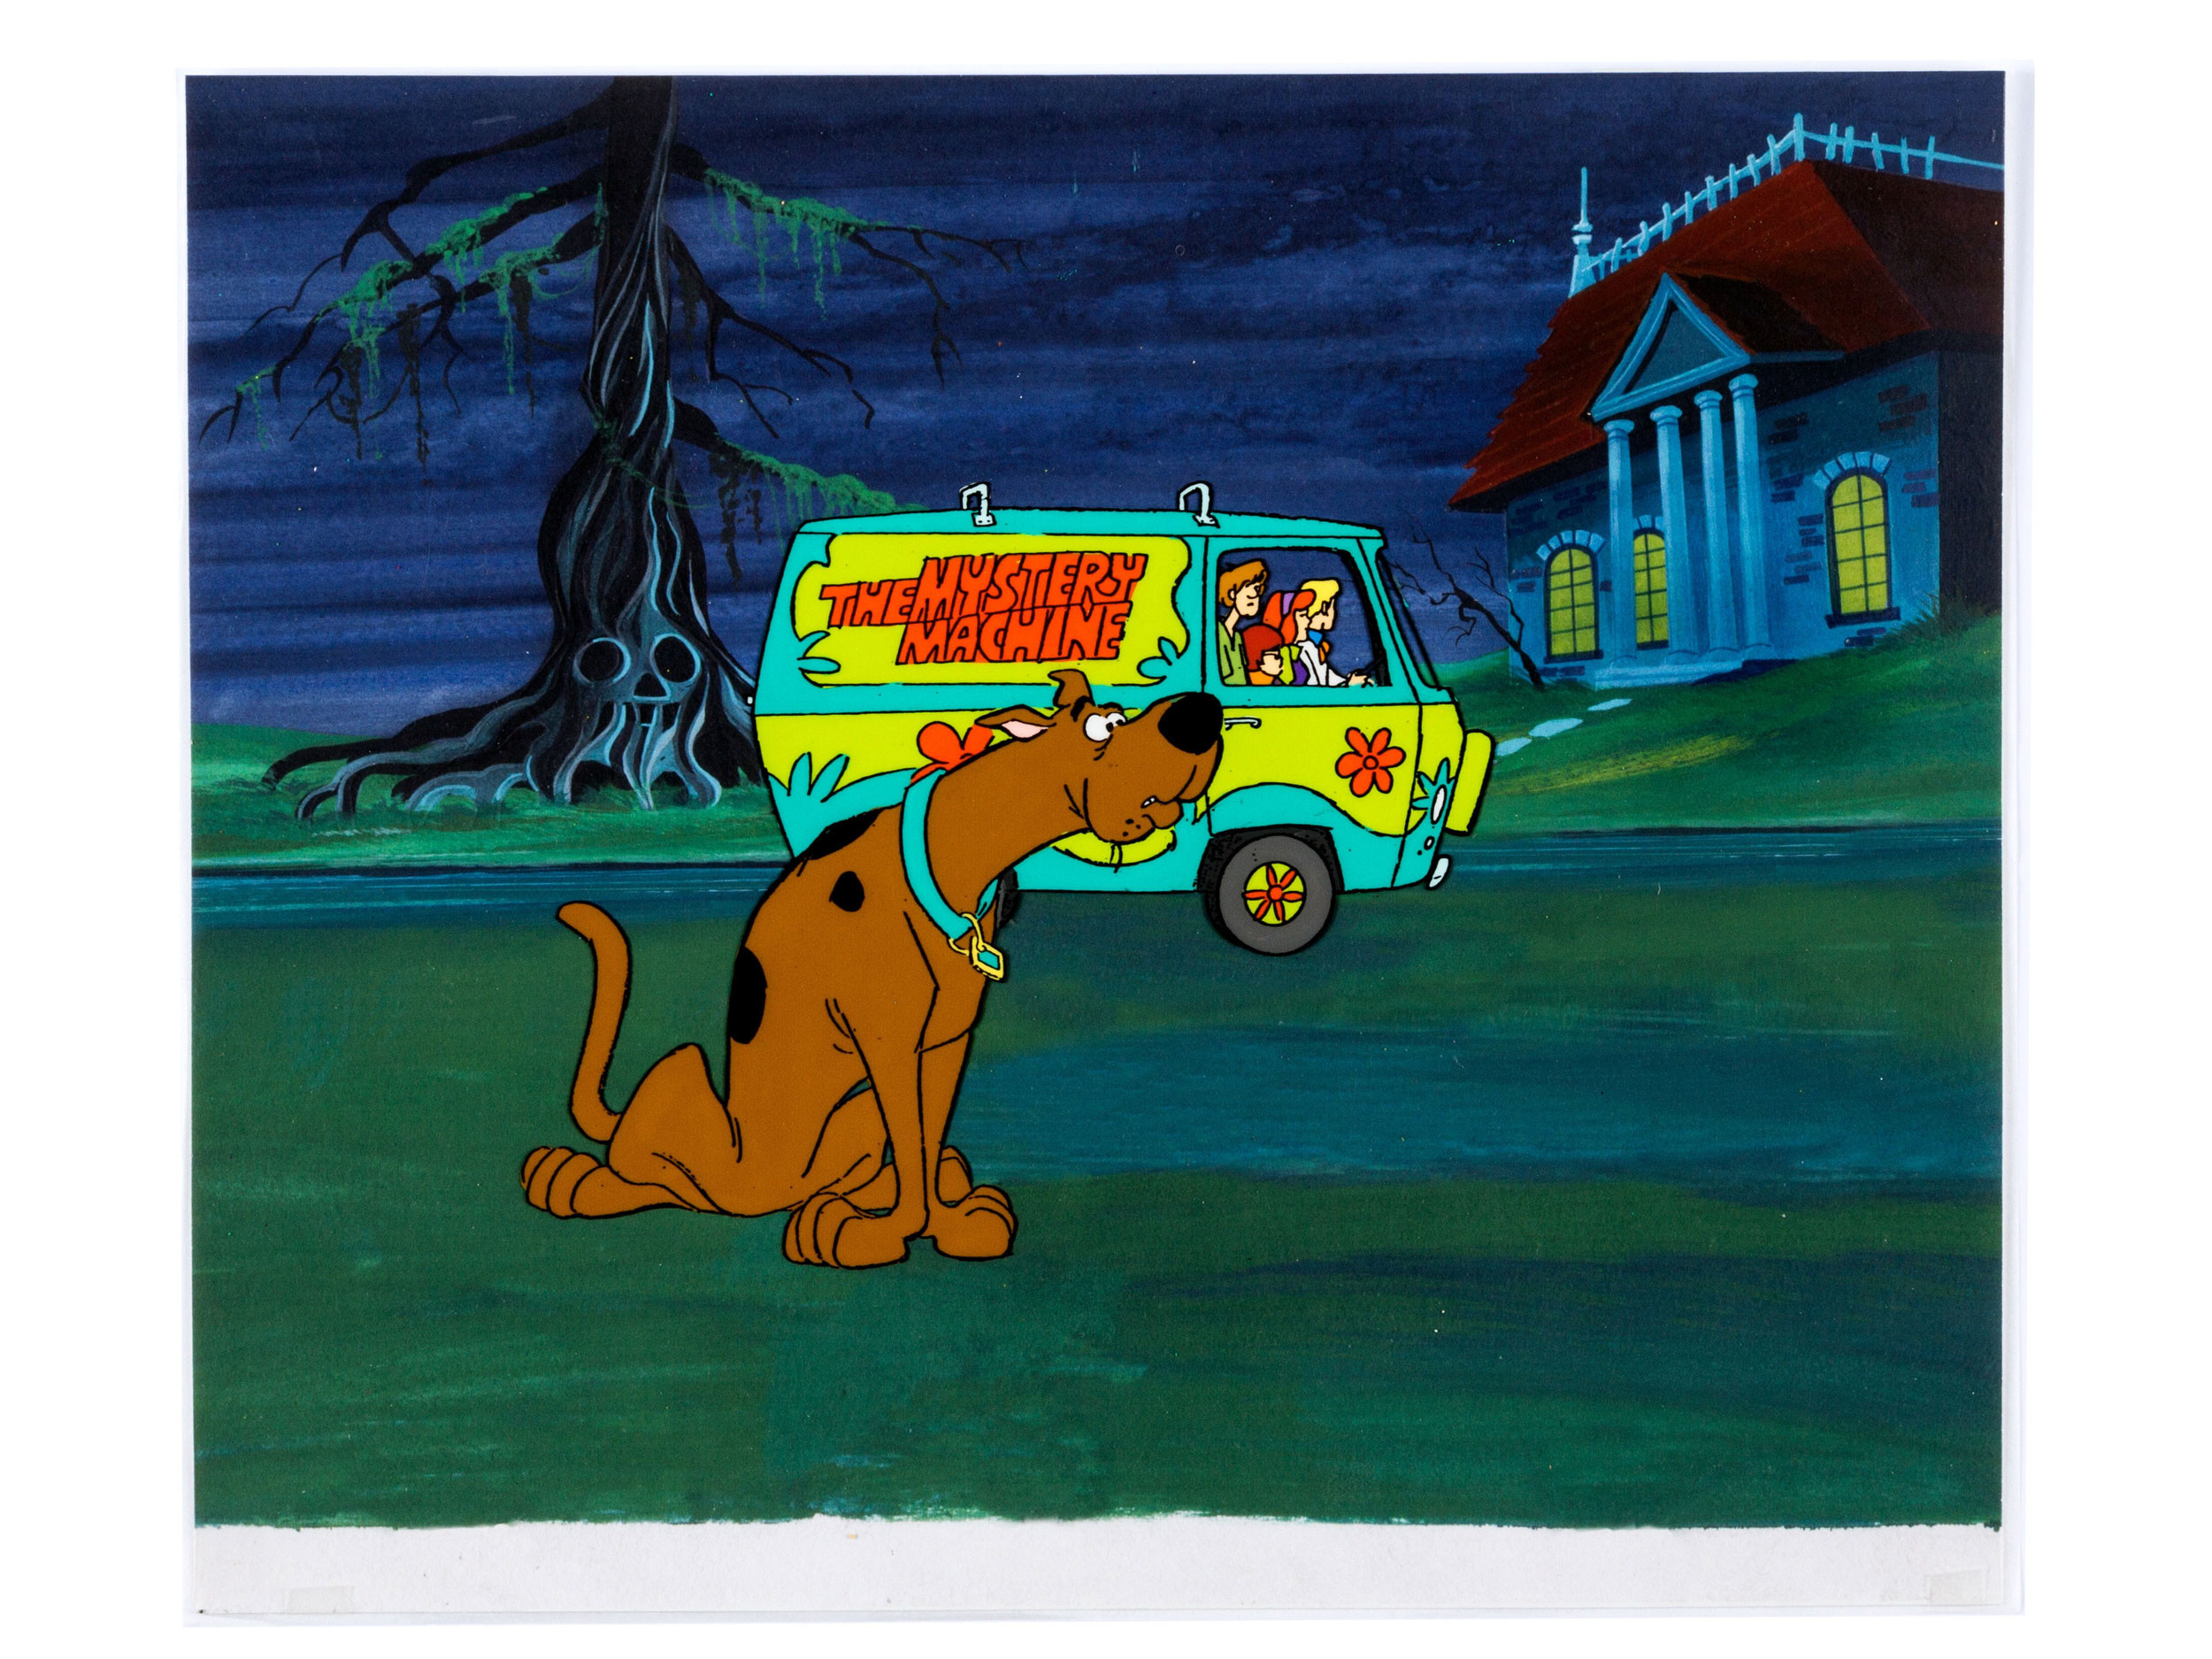 2500x1875 Prepare Your Wallet for This Massive Auction of Vintage Cartoon Stills